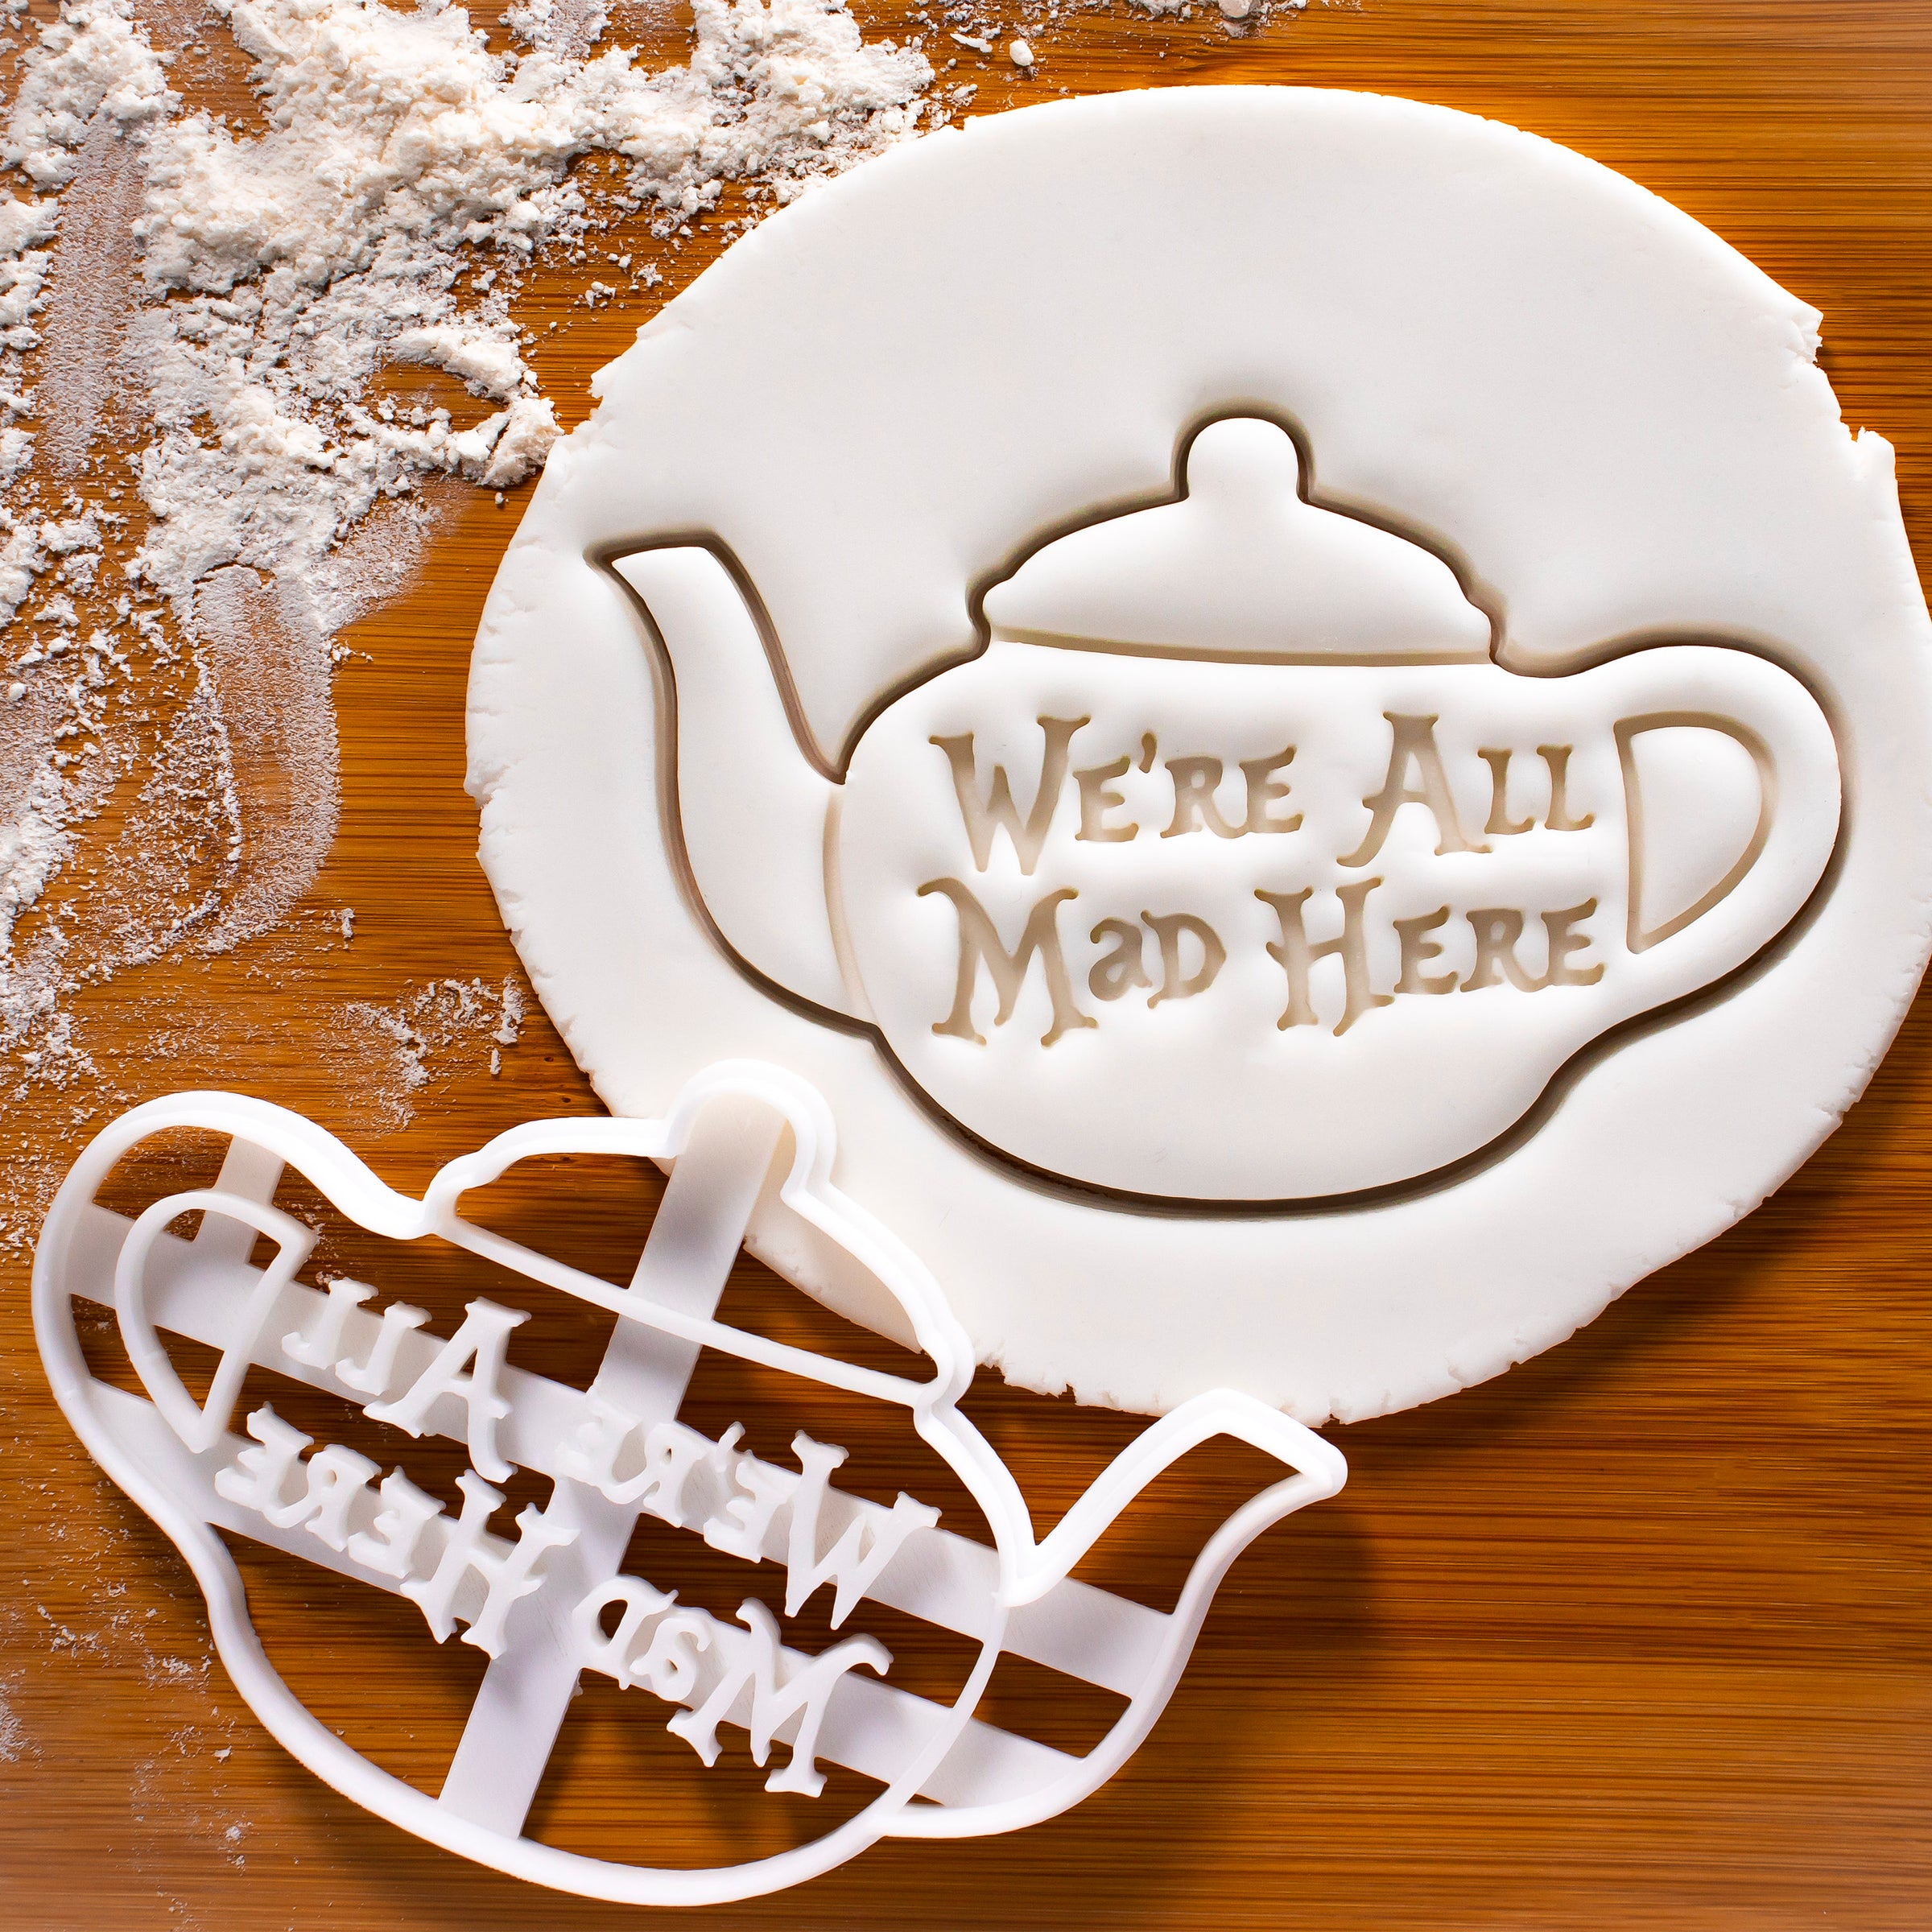 We are all Mad Here Teapot Cookie Cutter